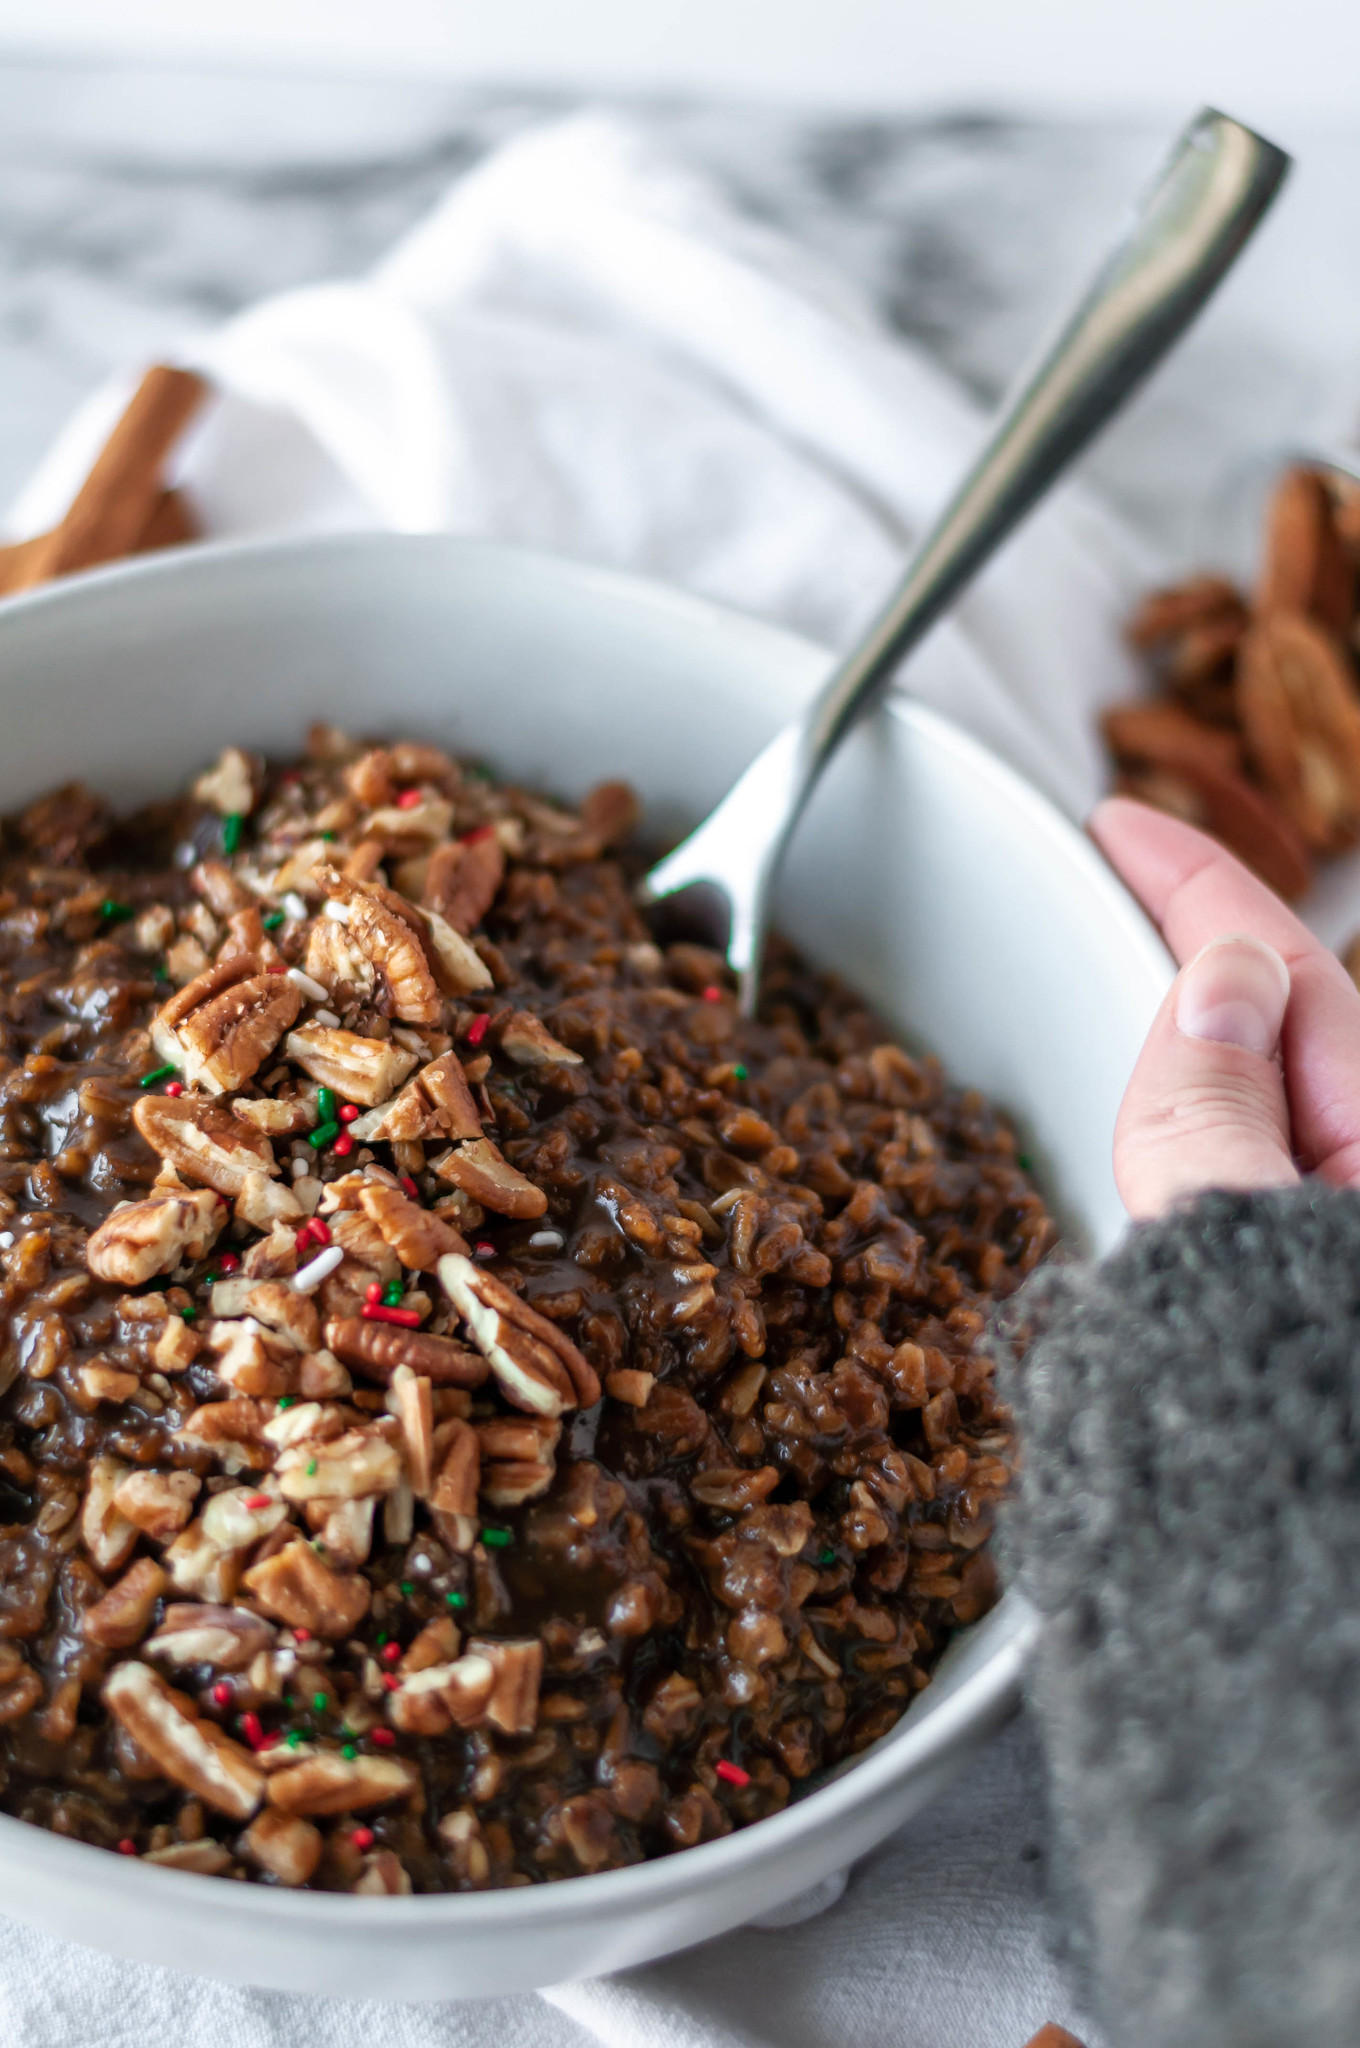 Instant Pot Gingerbread Oatmeal will bring all the holiday spirit. Tons of gingerbread flavor packed into breakfast for a healthy spin on a holiday favorite.